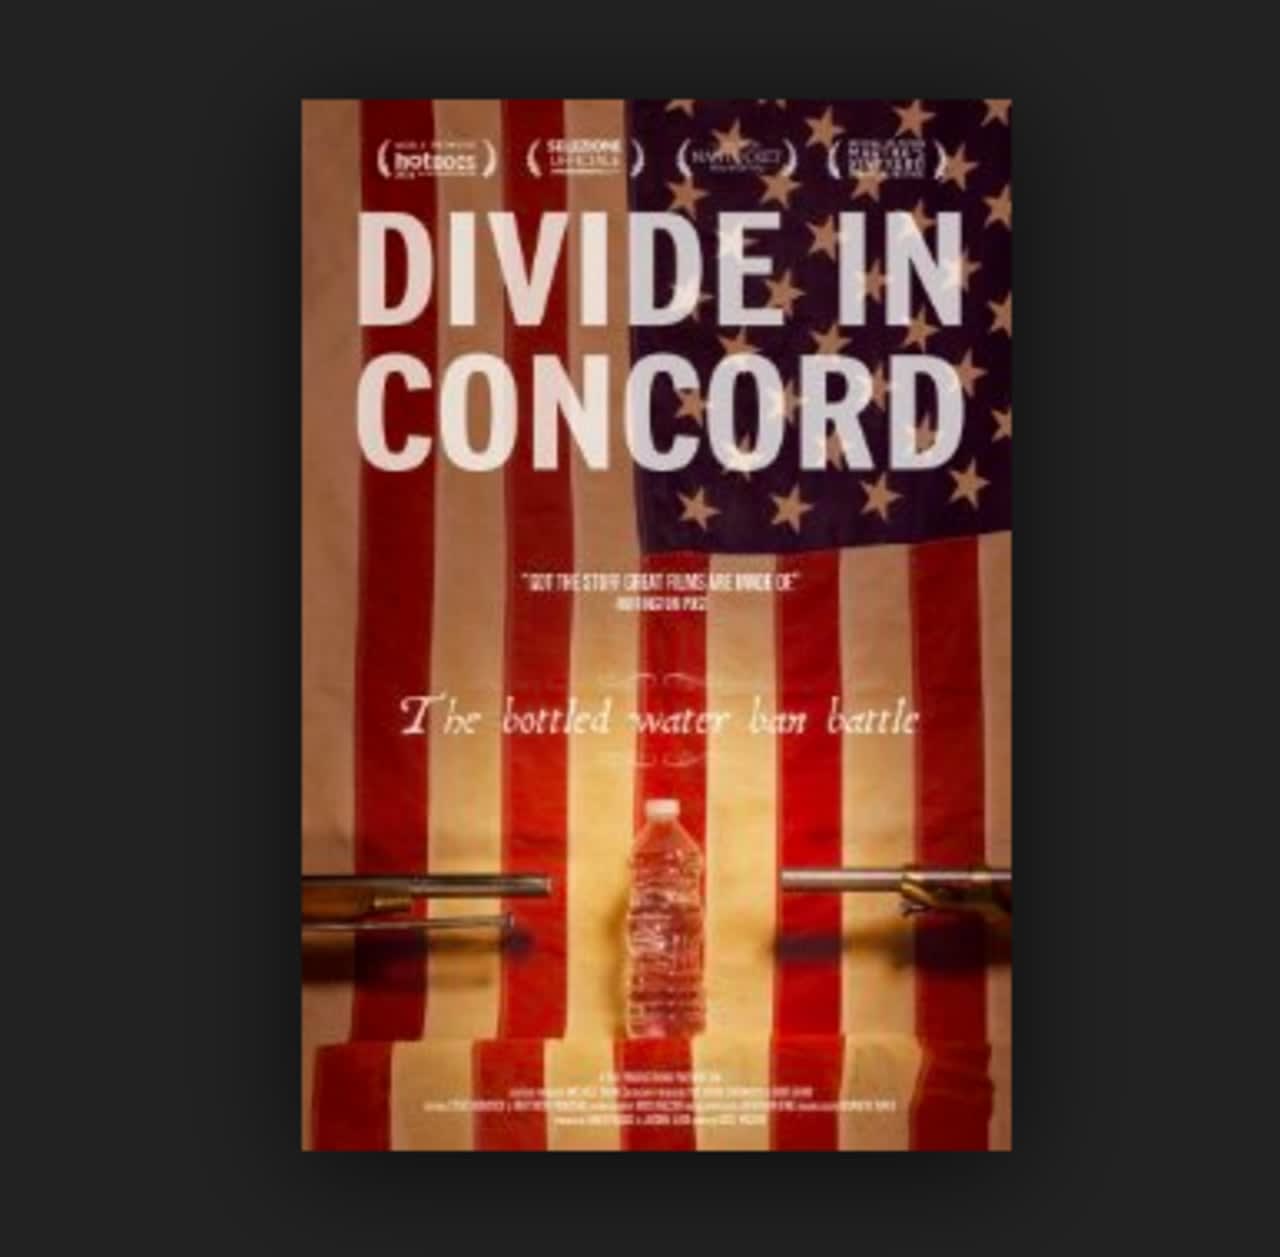 The New Canaan Library is showing "Divide in Concord," a feature-length documentary that follows the tale of banning bottled water in small-town America.